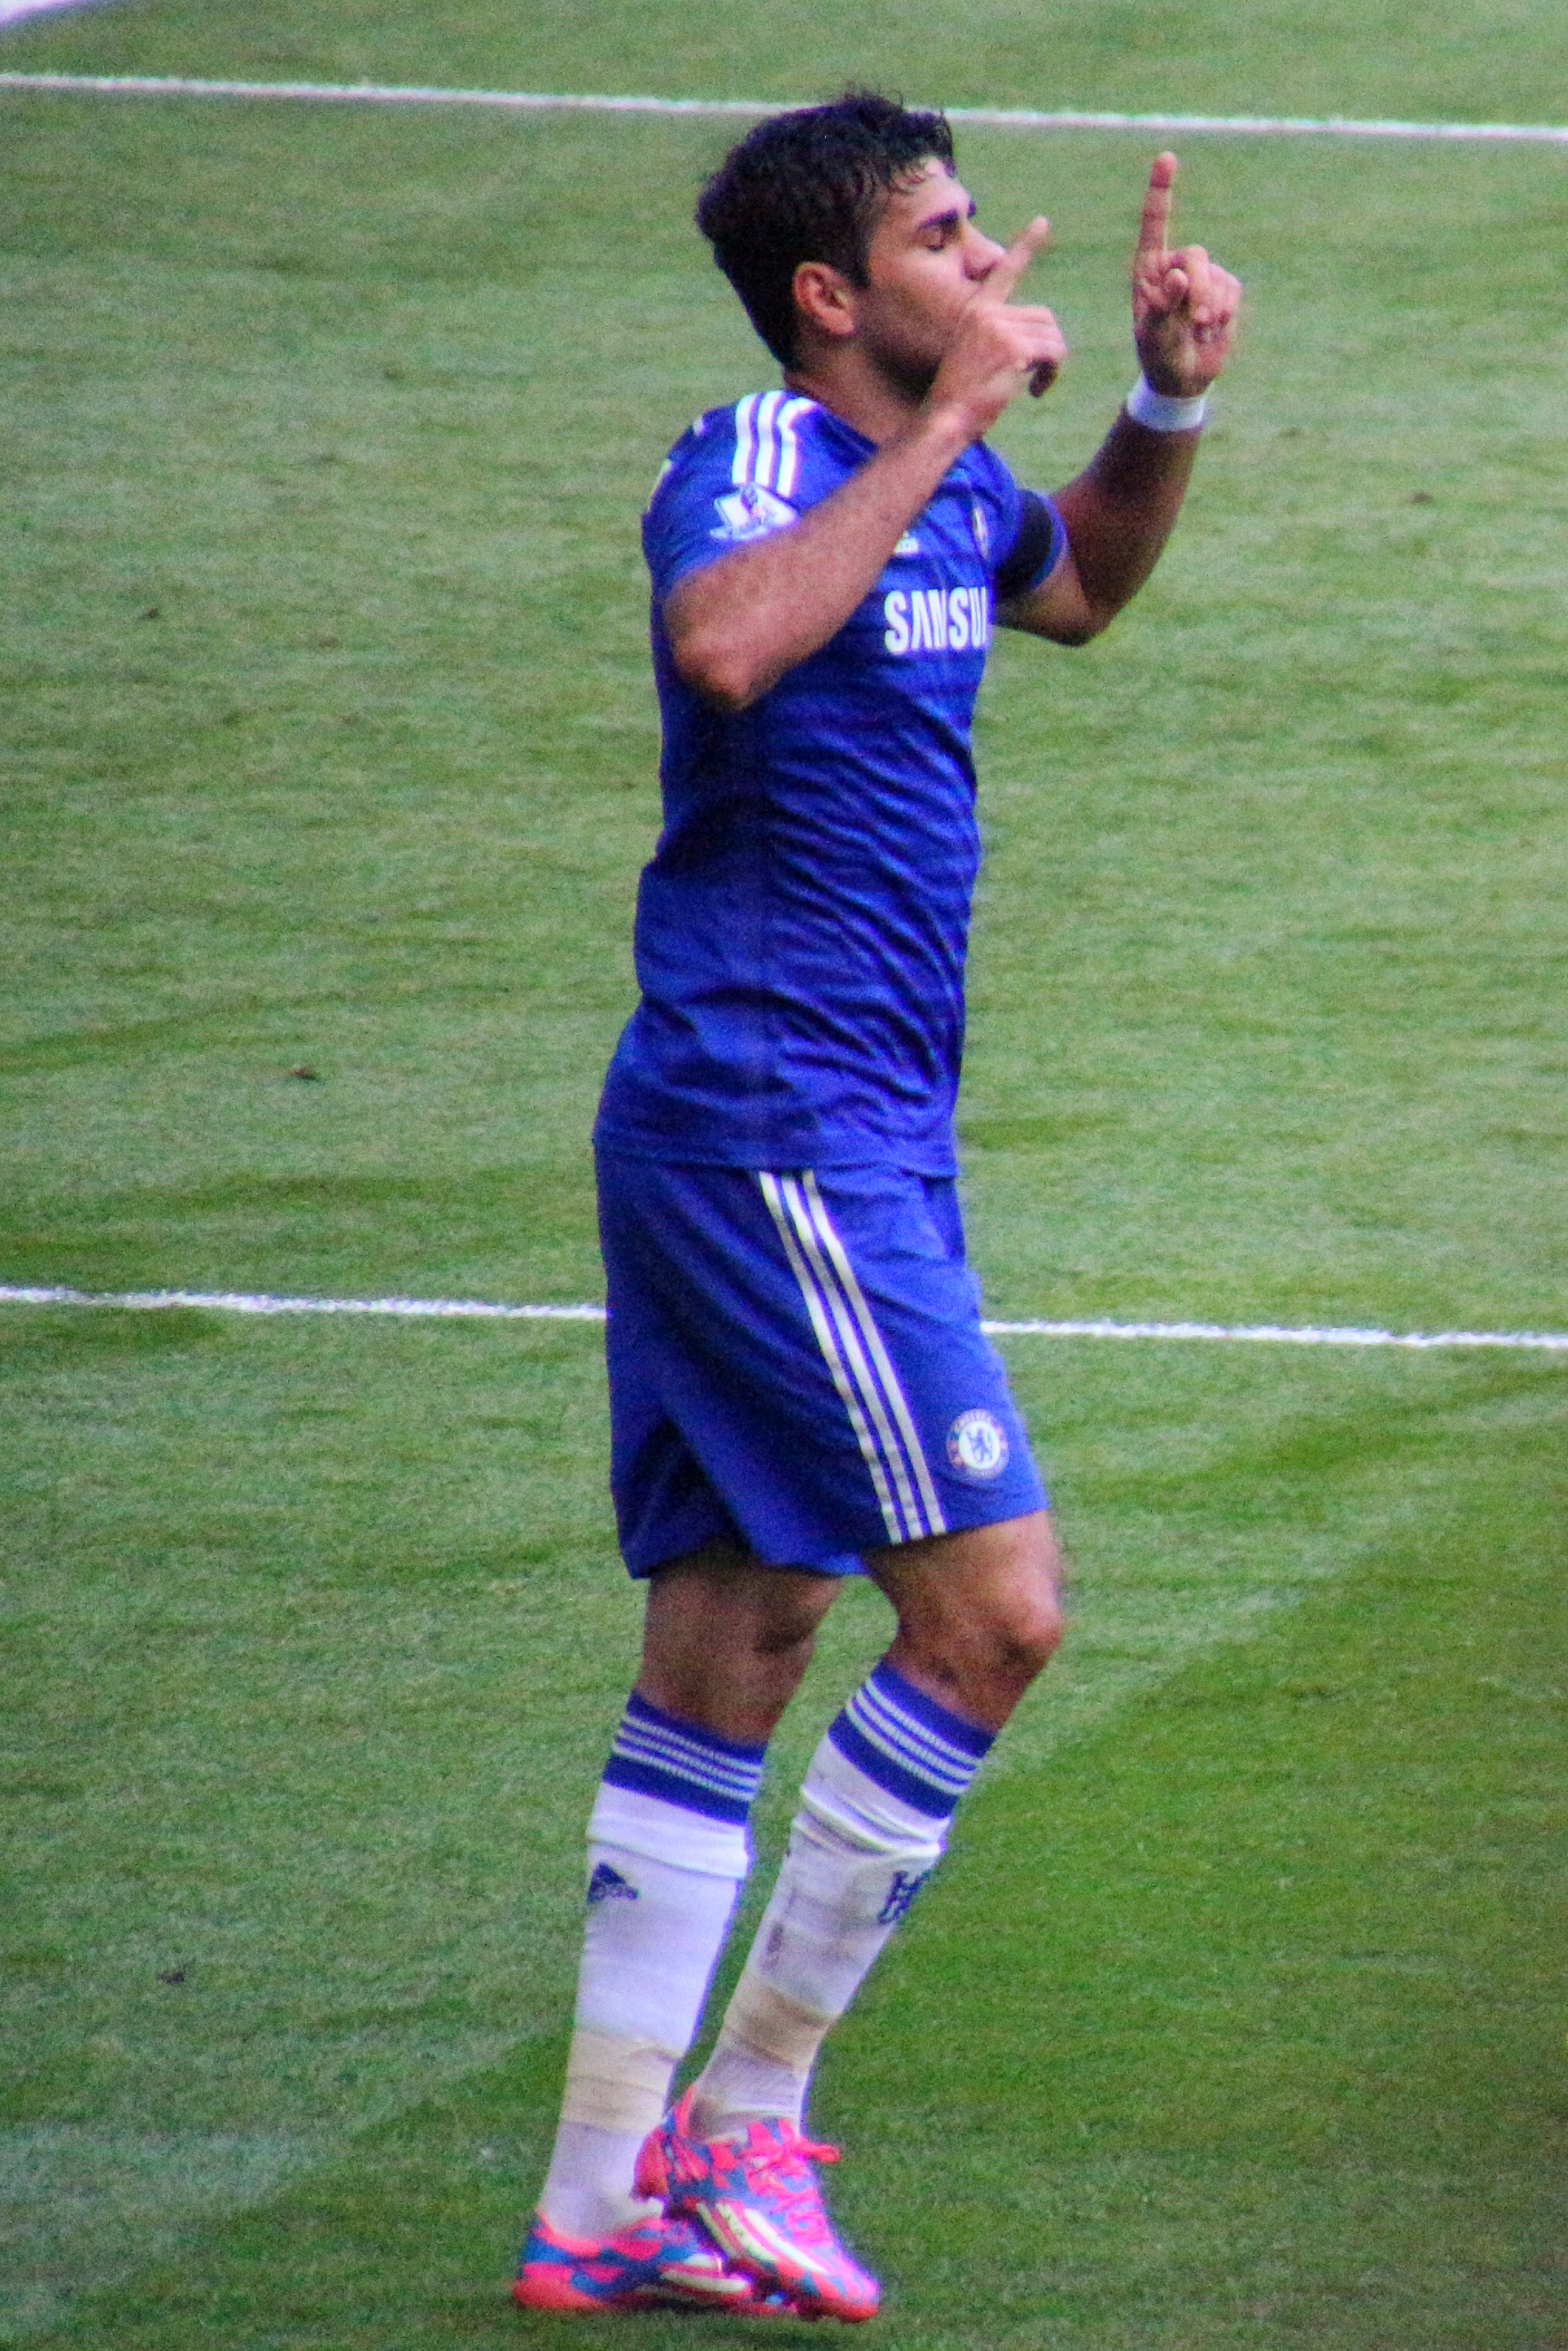 Photo Credits: Diego Costa by cfcunofficial